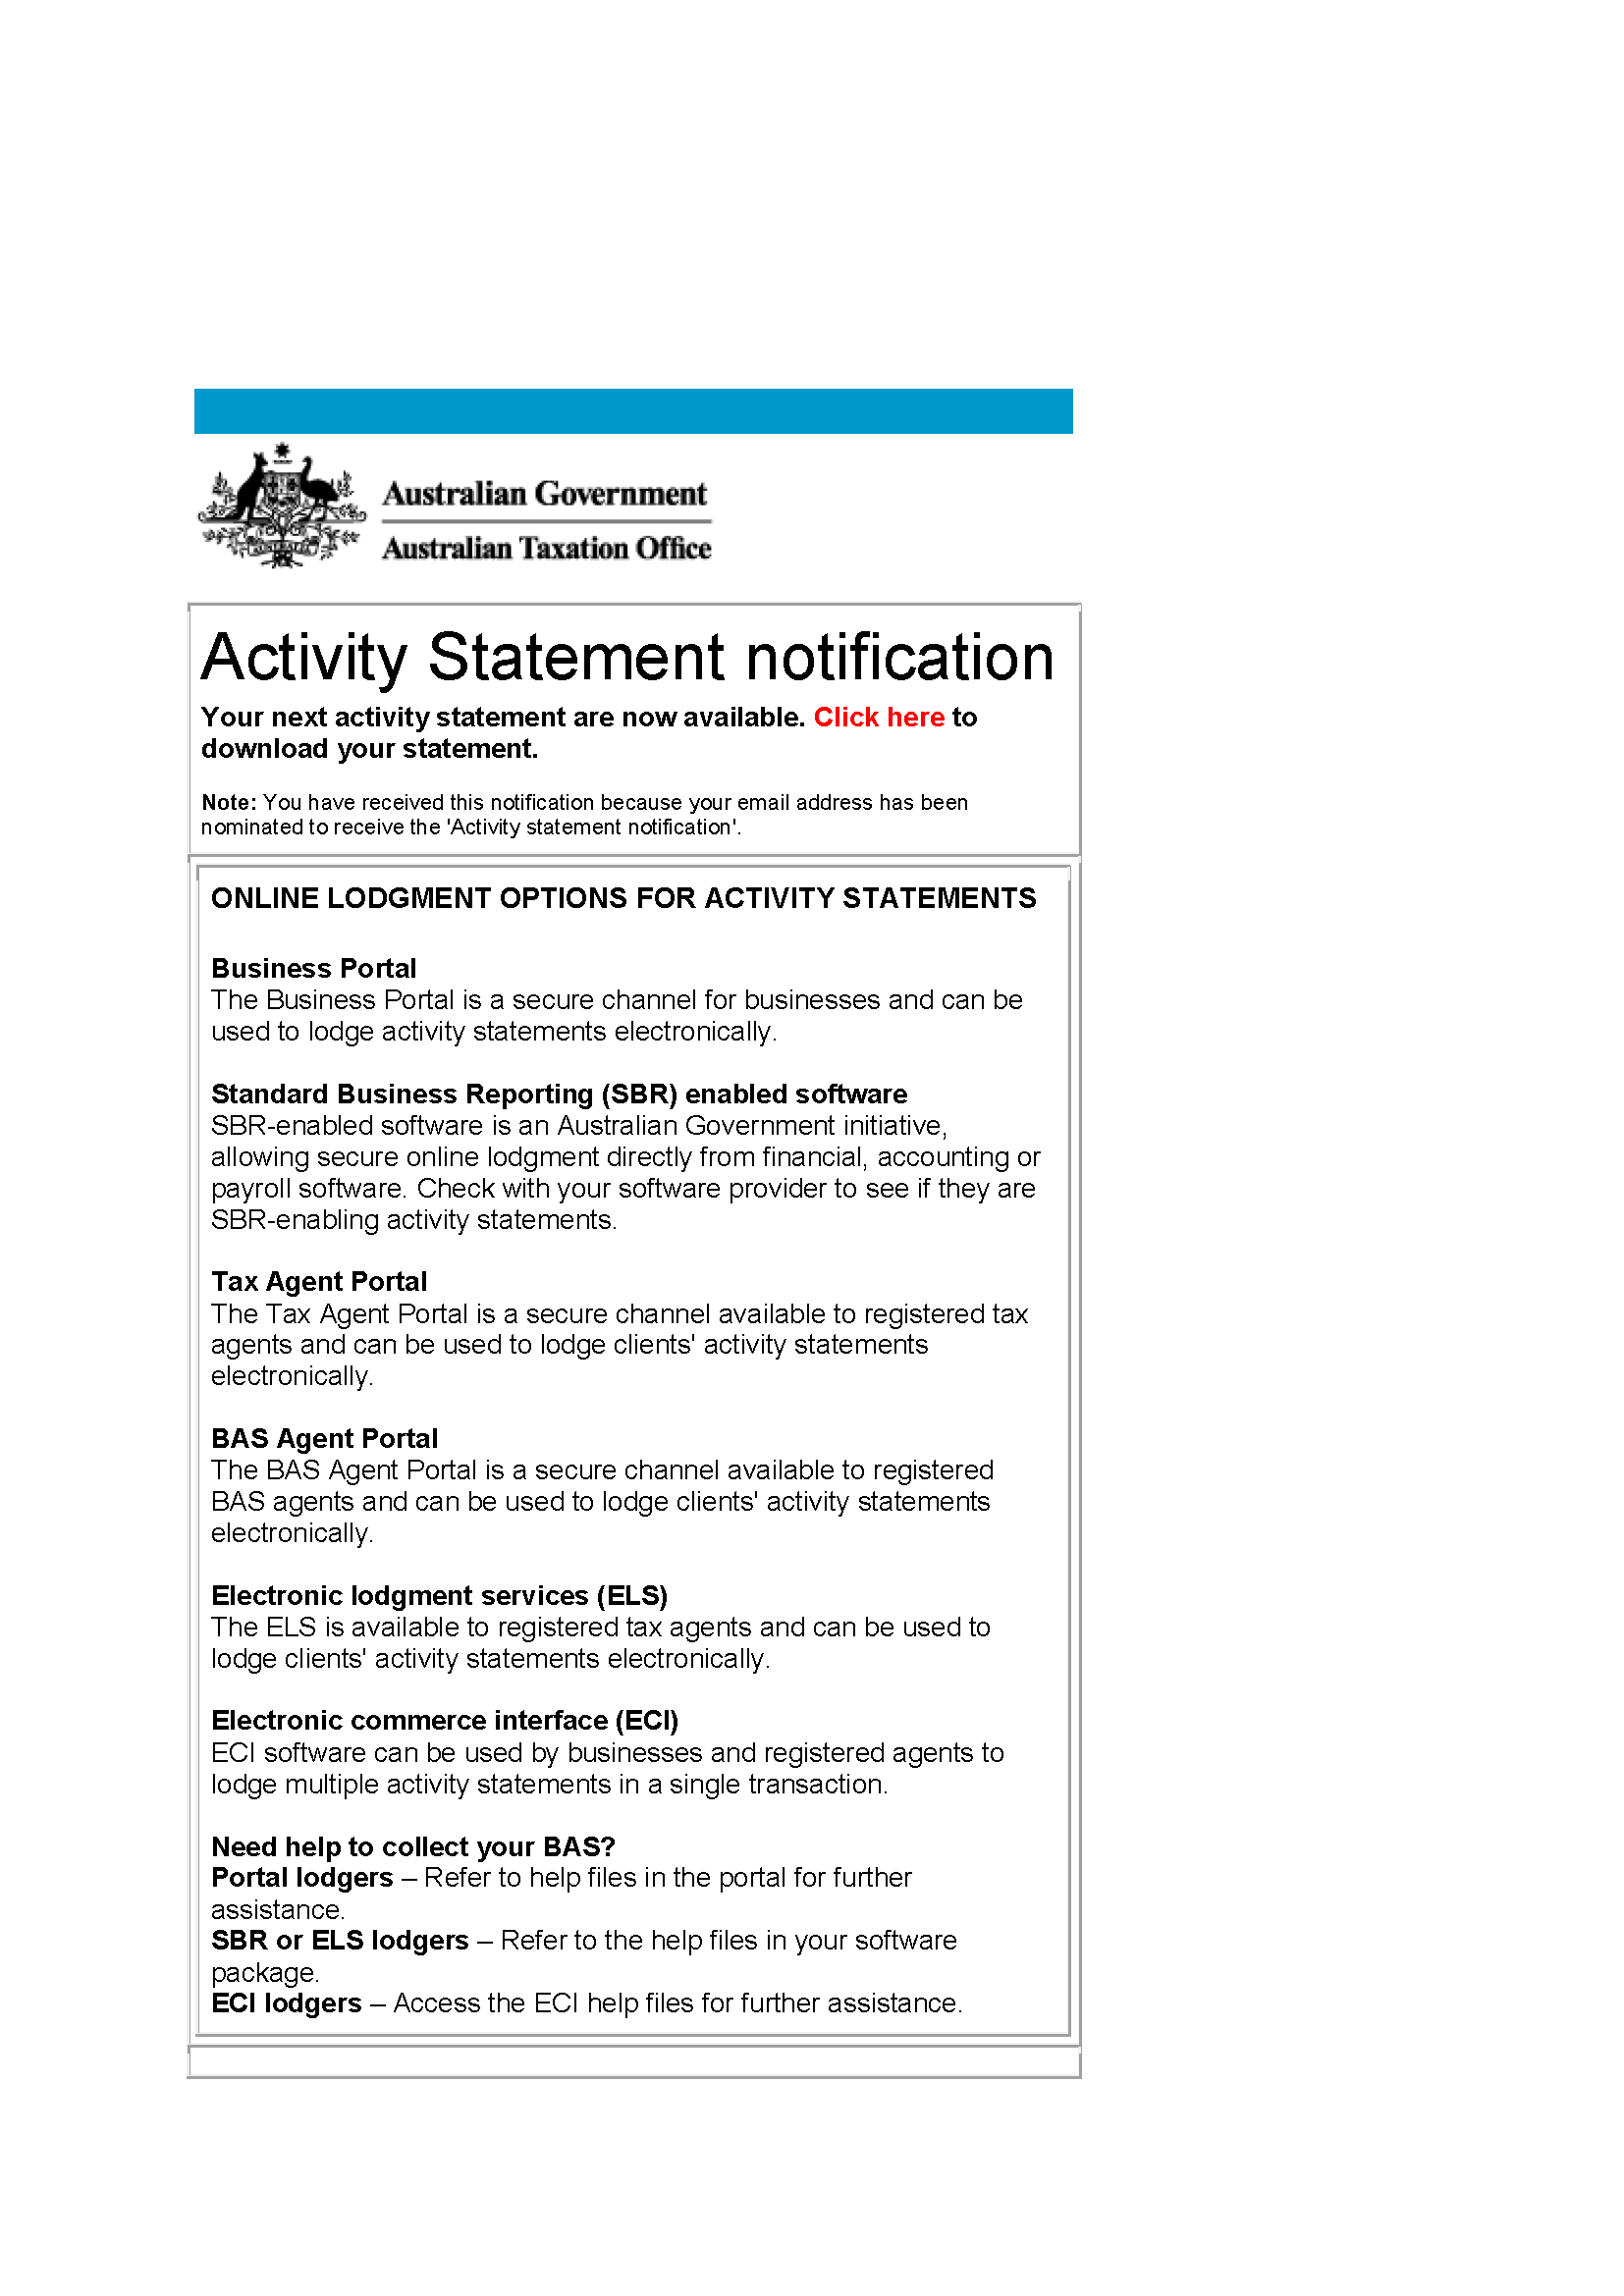 ATO Email Activity Statement notification_Page_1 - Forecast IT